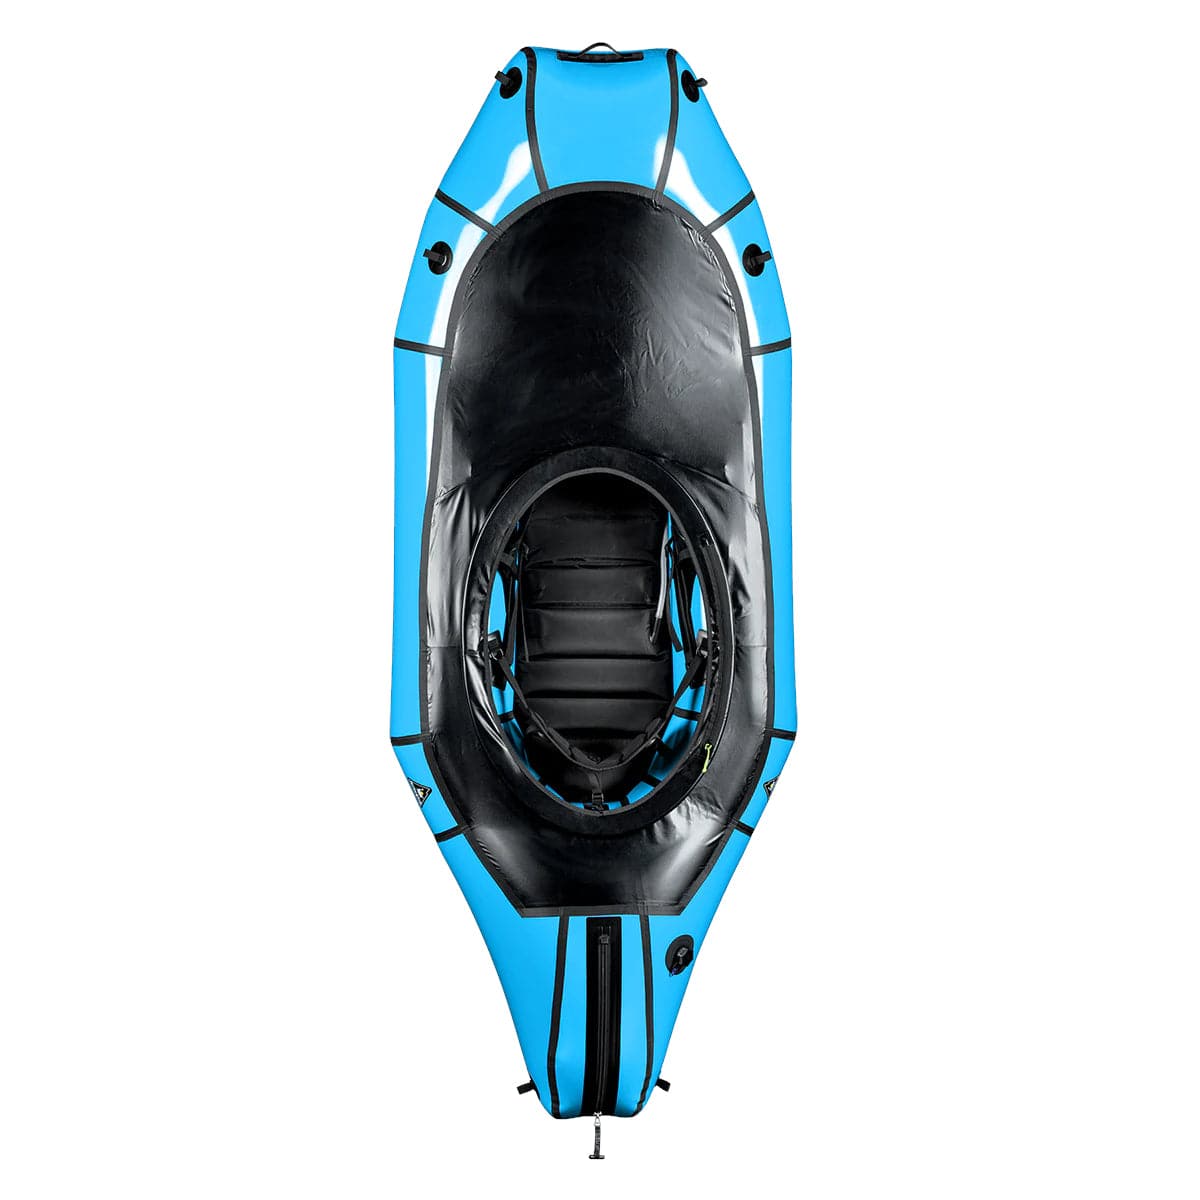 Featuring the GnarMule pack raft, pack rafting manufactured by Alpacka shown here from a third angle.